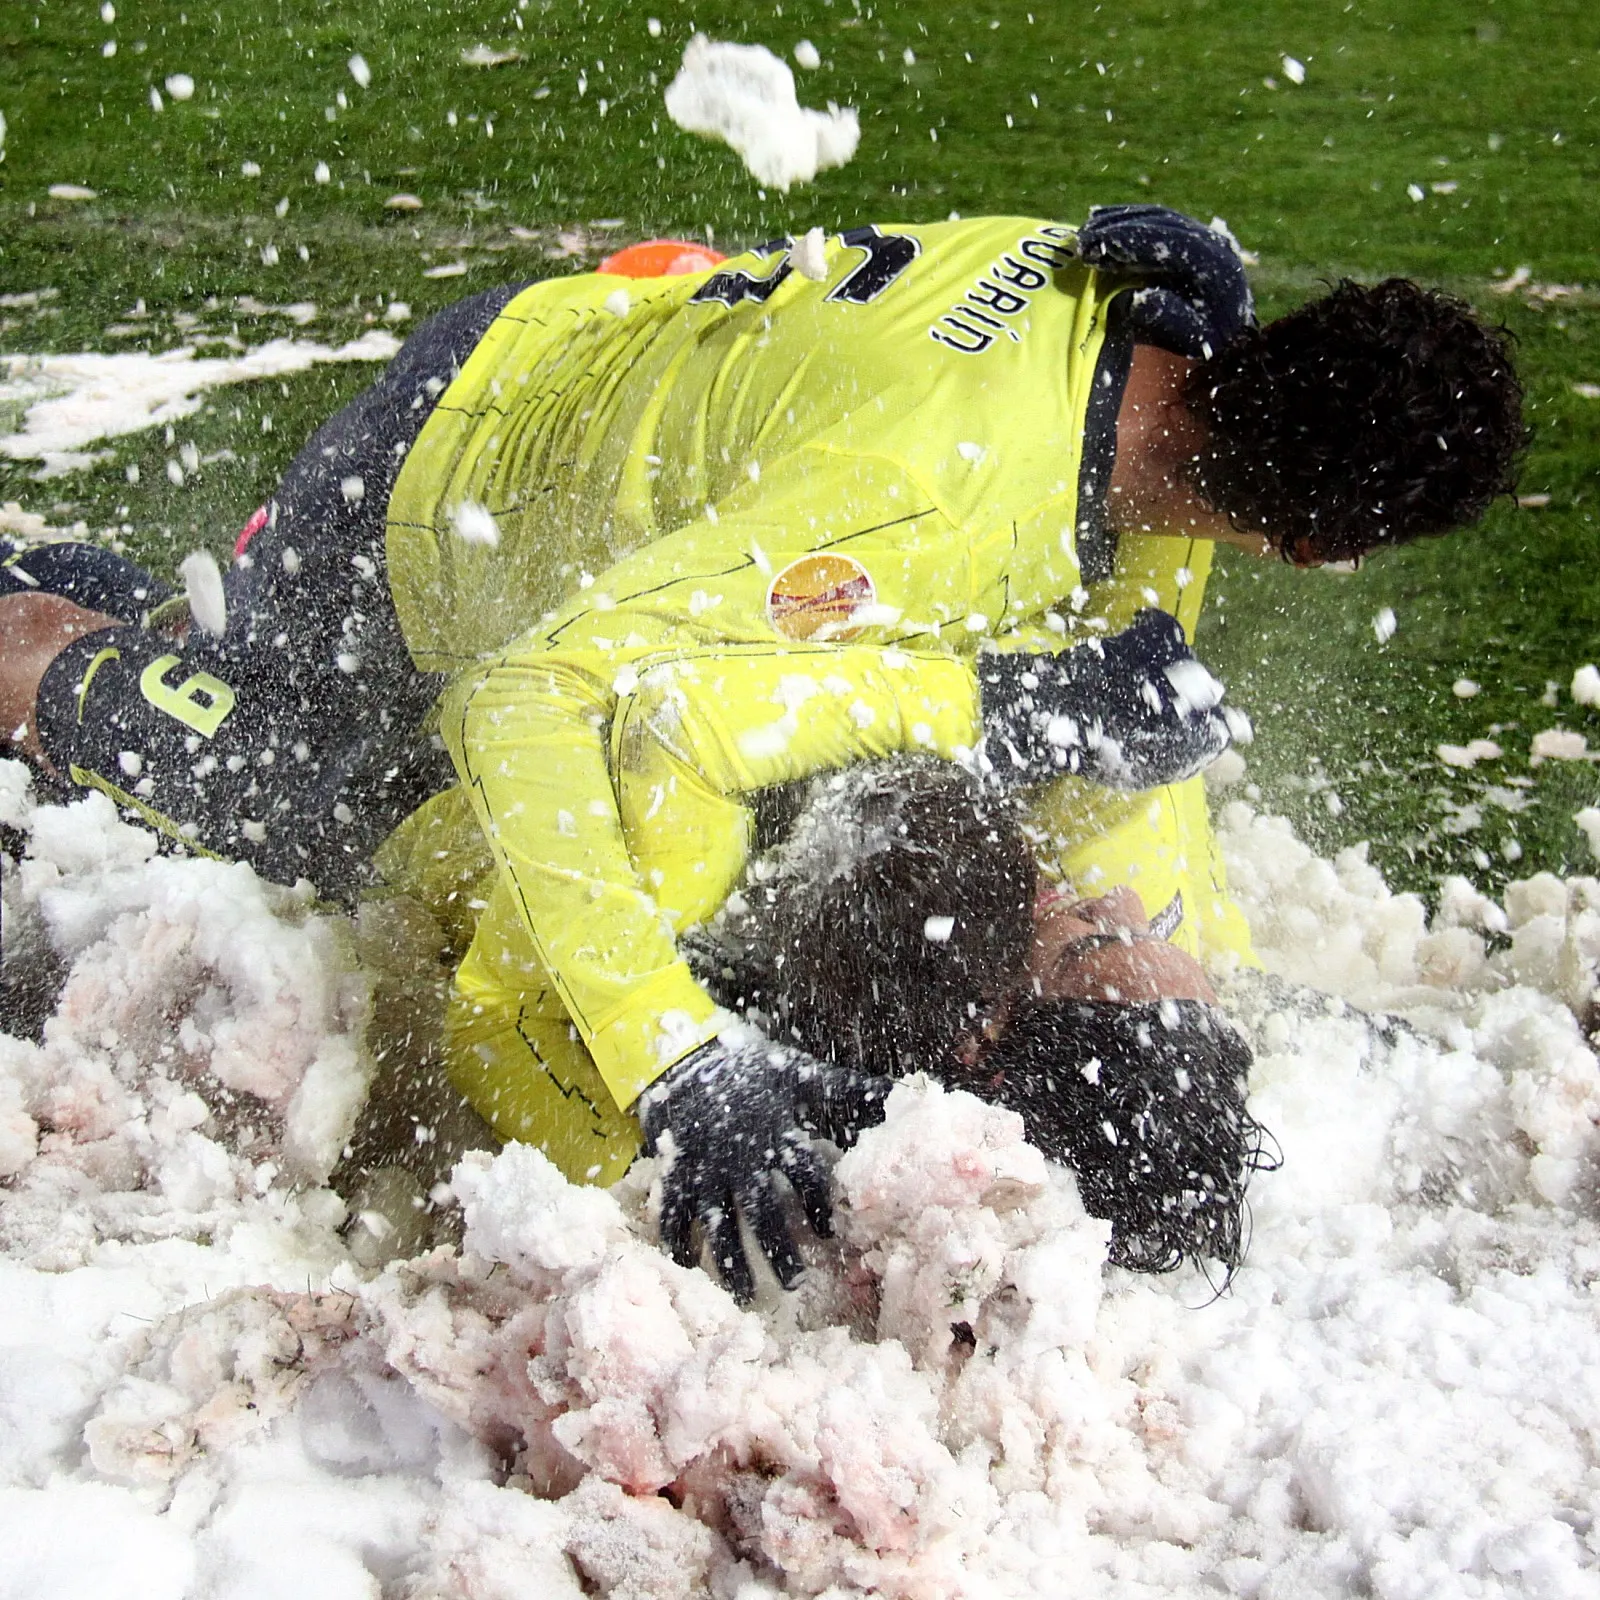 Photo showing: 2010–11 UEFA Europa League - SK Rapid Wien vs. F.C. Porto 1:3, Ernst-Happel-Stadion (Vienna) – Radamel Falcao (#9) scored his 3rd goal. Portos players are jubilant in the snow unusual for it. Freddy Guarín and Ukra throw with snow.